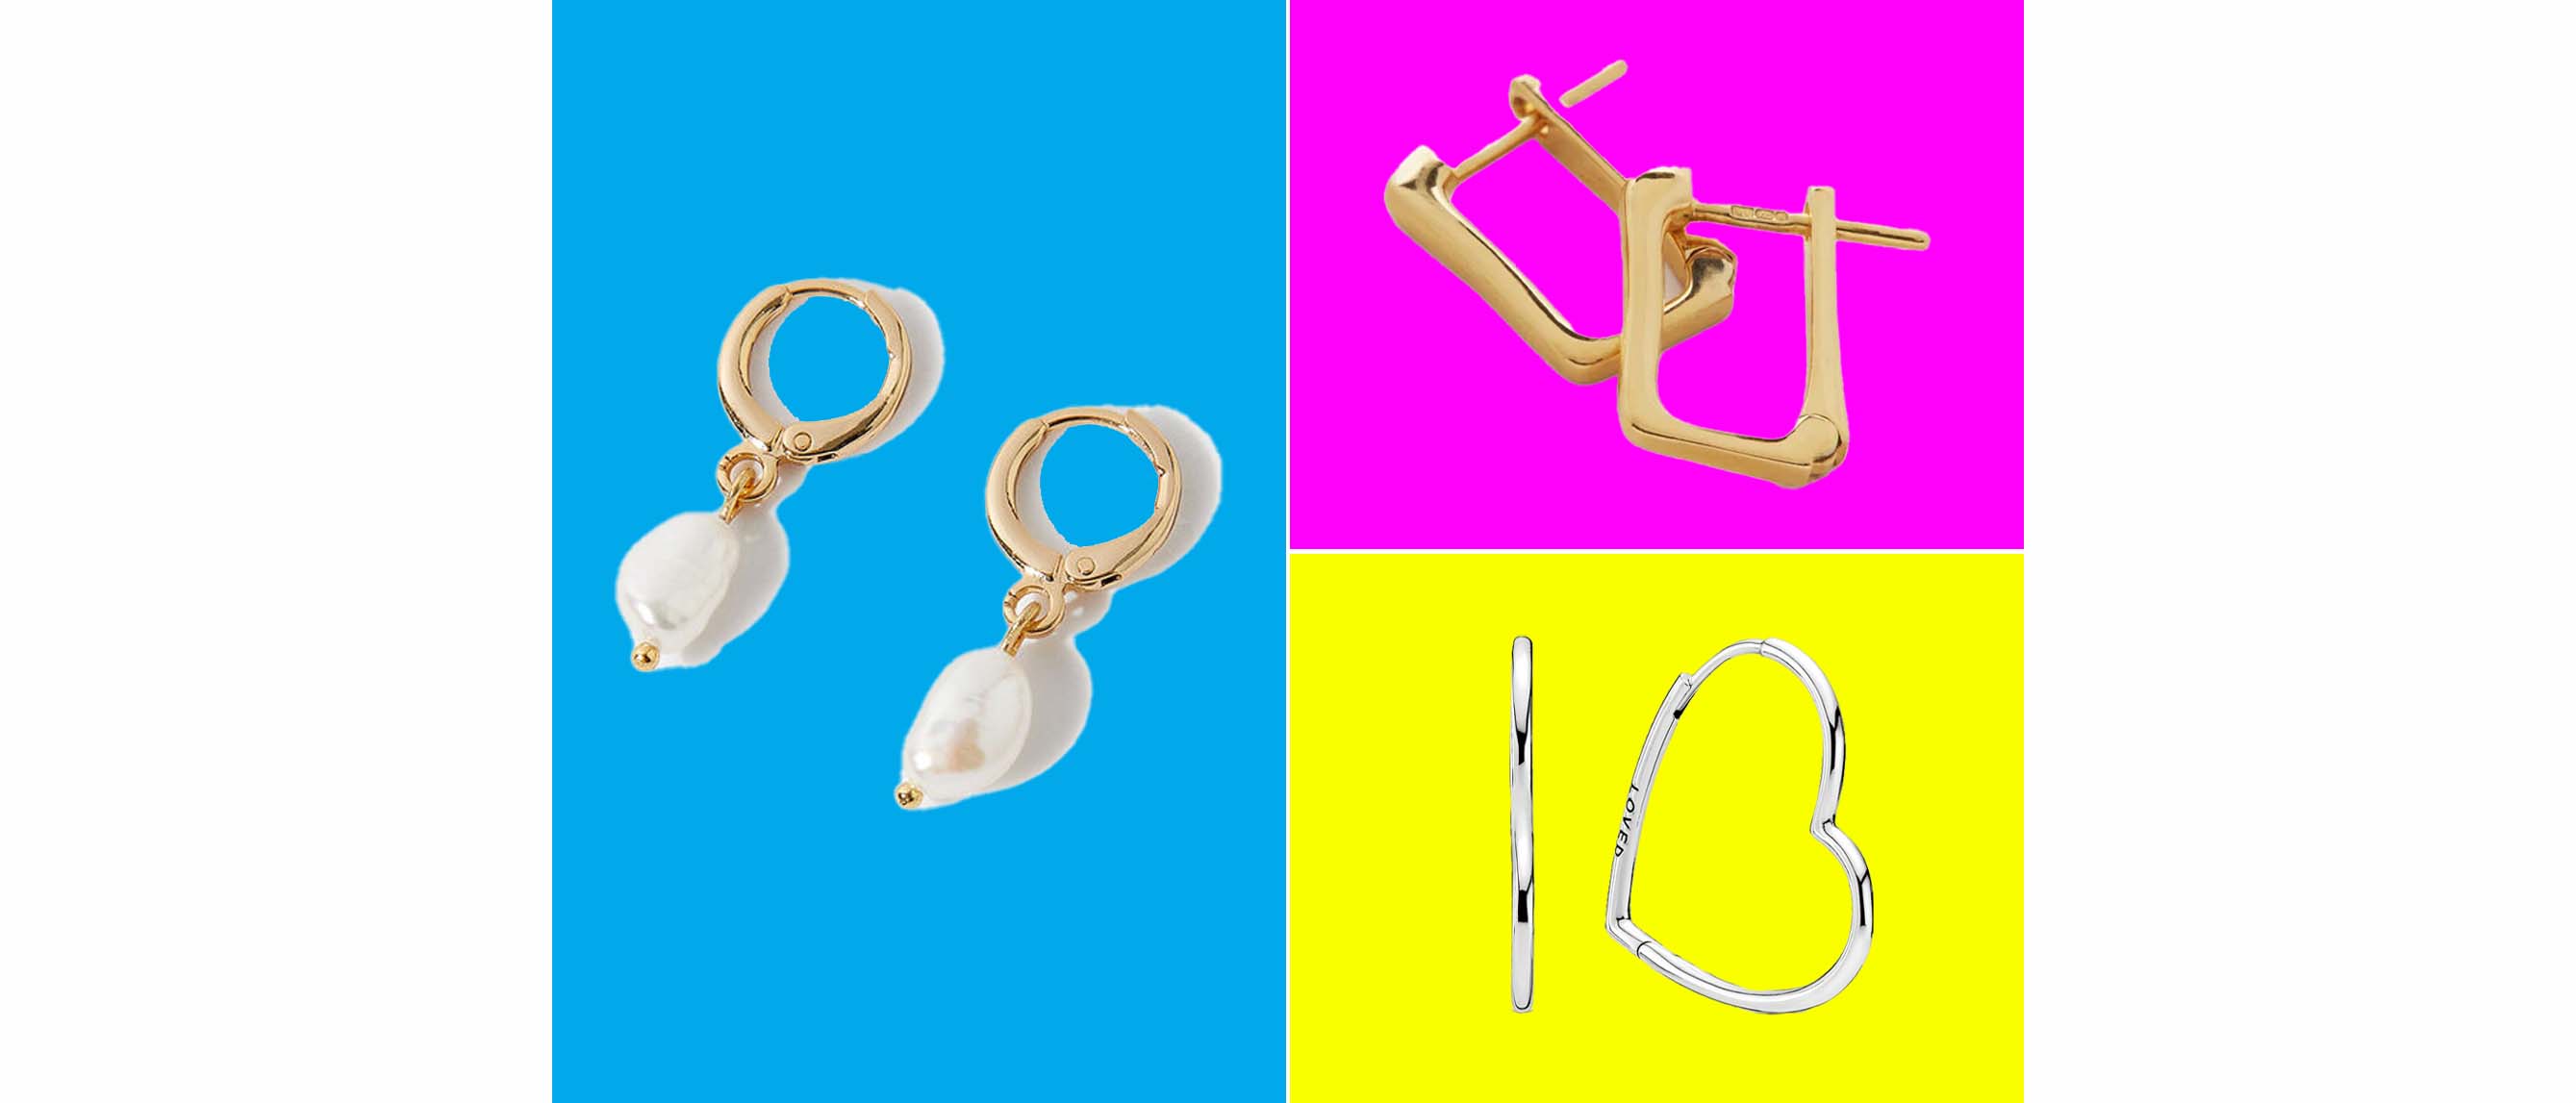 24 Gold Hoop Earrings That Belong in Every Jewelry Collection  Teen Vogue